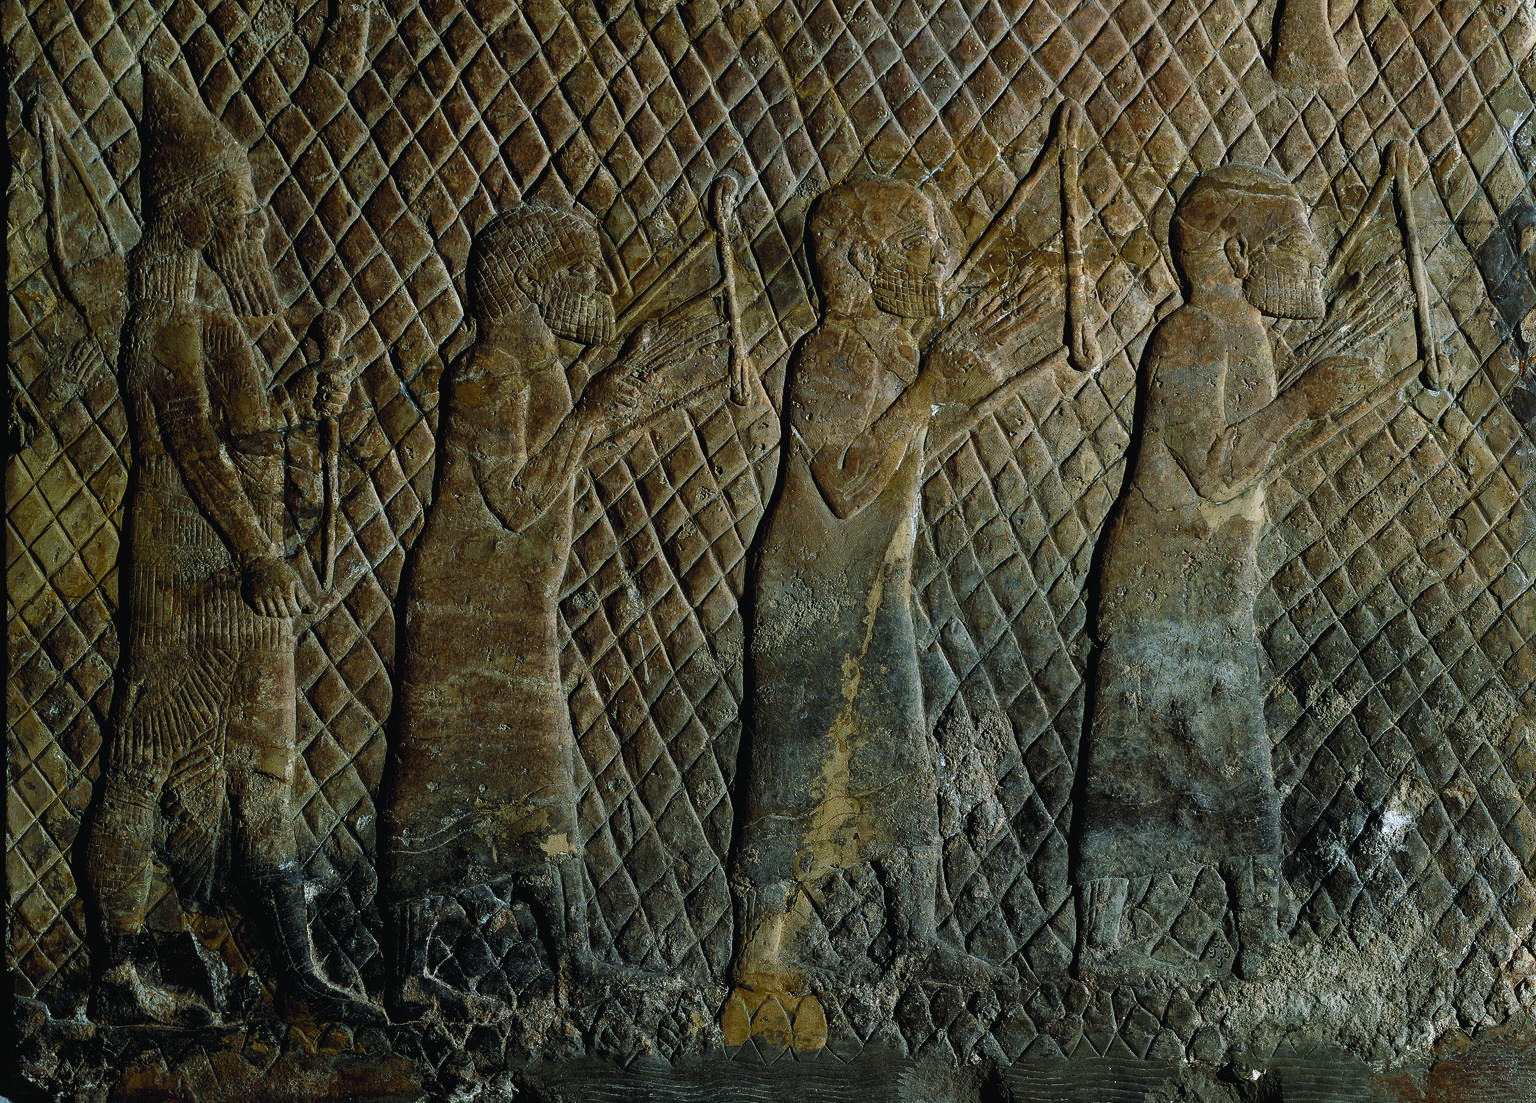 Wall relief showing three bare-headed musicians in tunics holding stringed instruments against their chests, with bearded soldier holding weapon behind them.